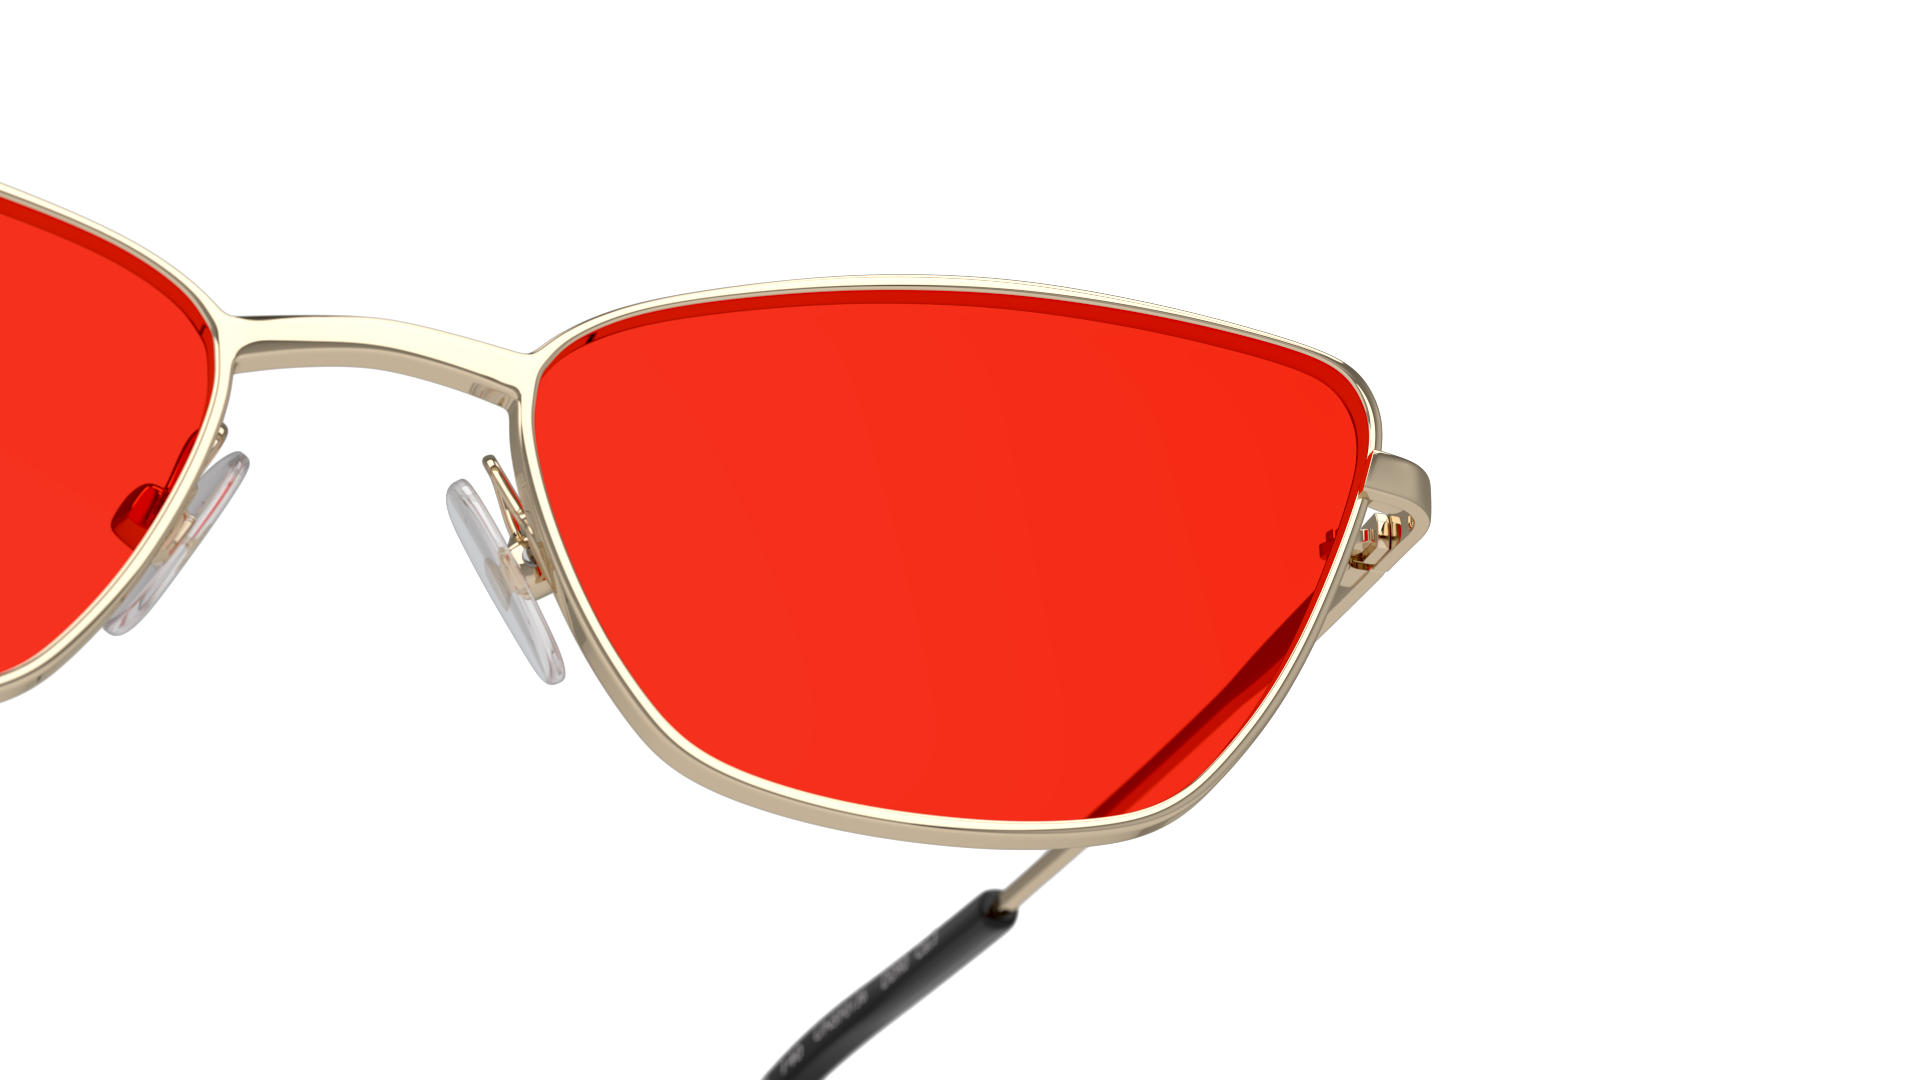 Detail01 Unofficial UNSF0136 Sunglasses Red / Gold